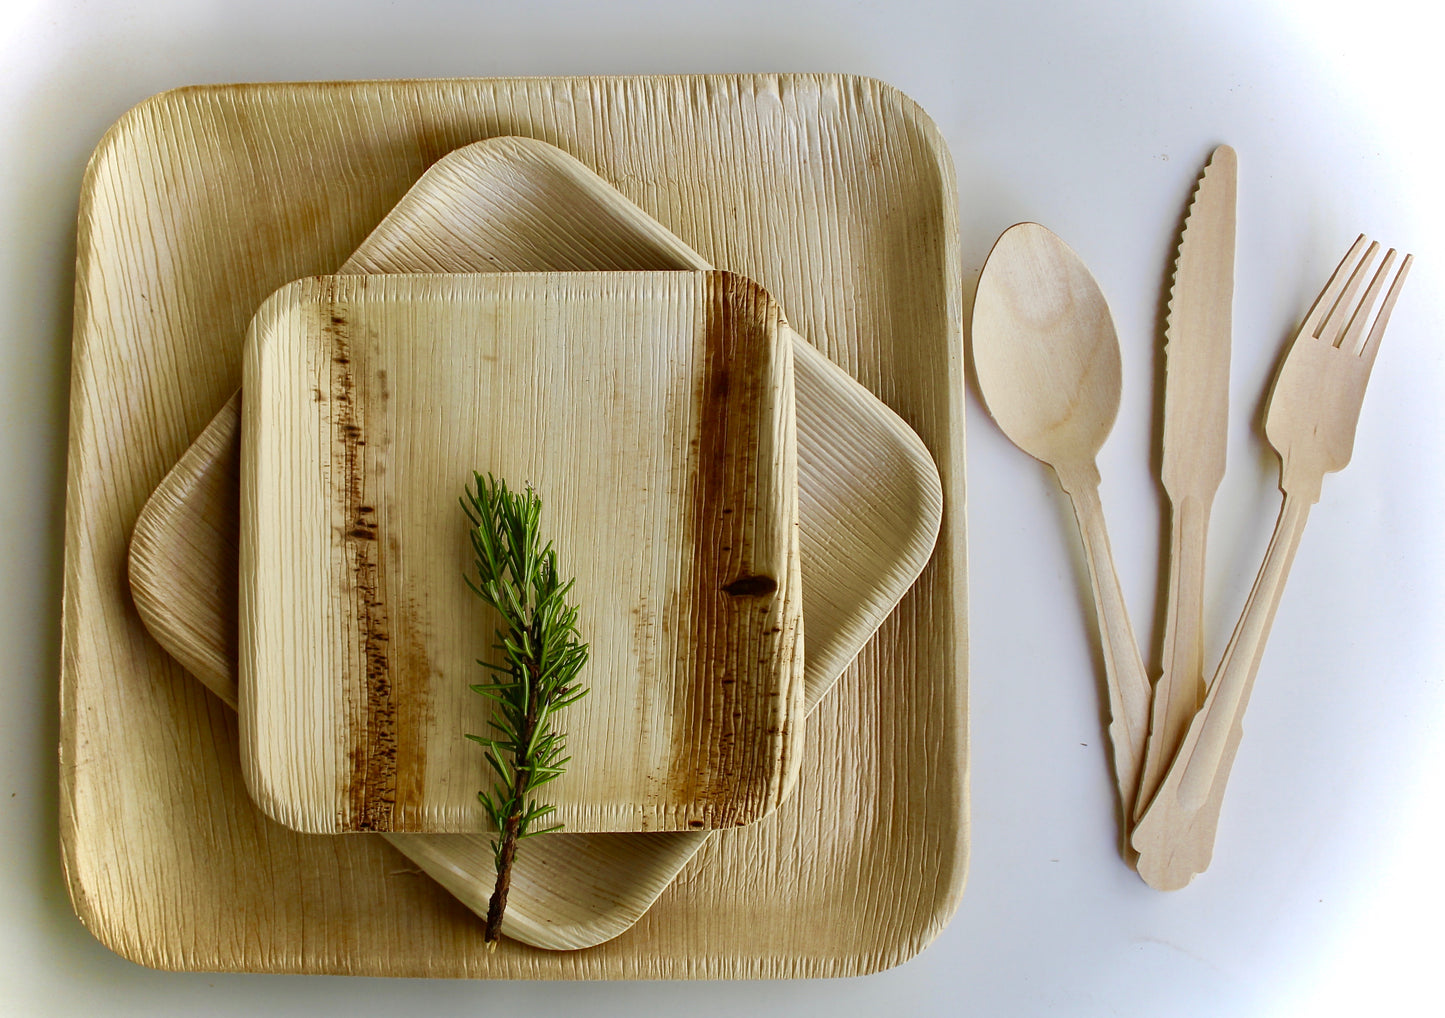 Bamboo Type Palm Leaf 10 Pic 9.5" Square - 10 pice 7" Square " - 10 pic 6" Square  - 30 pic Cutlery - 50 Pic Napkin